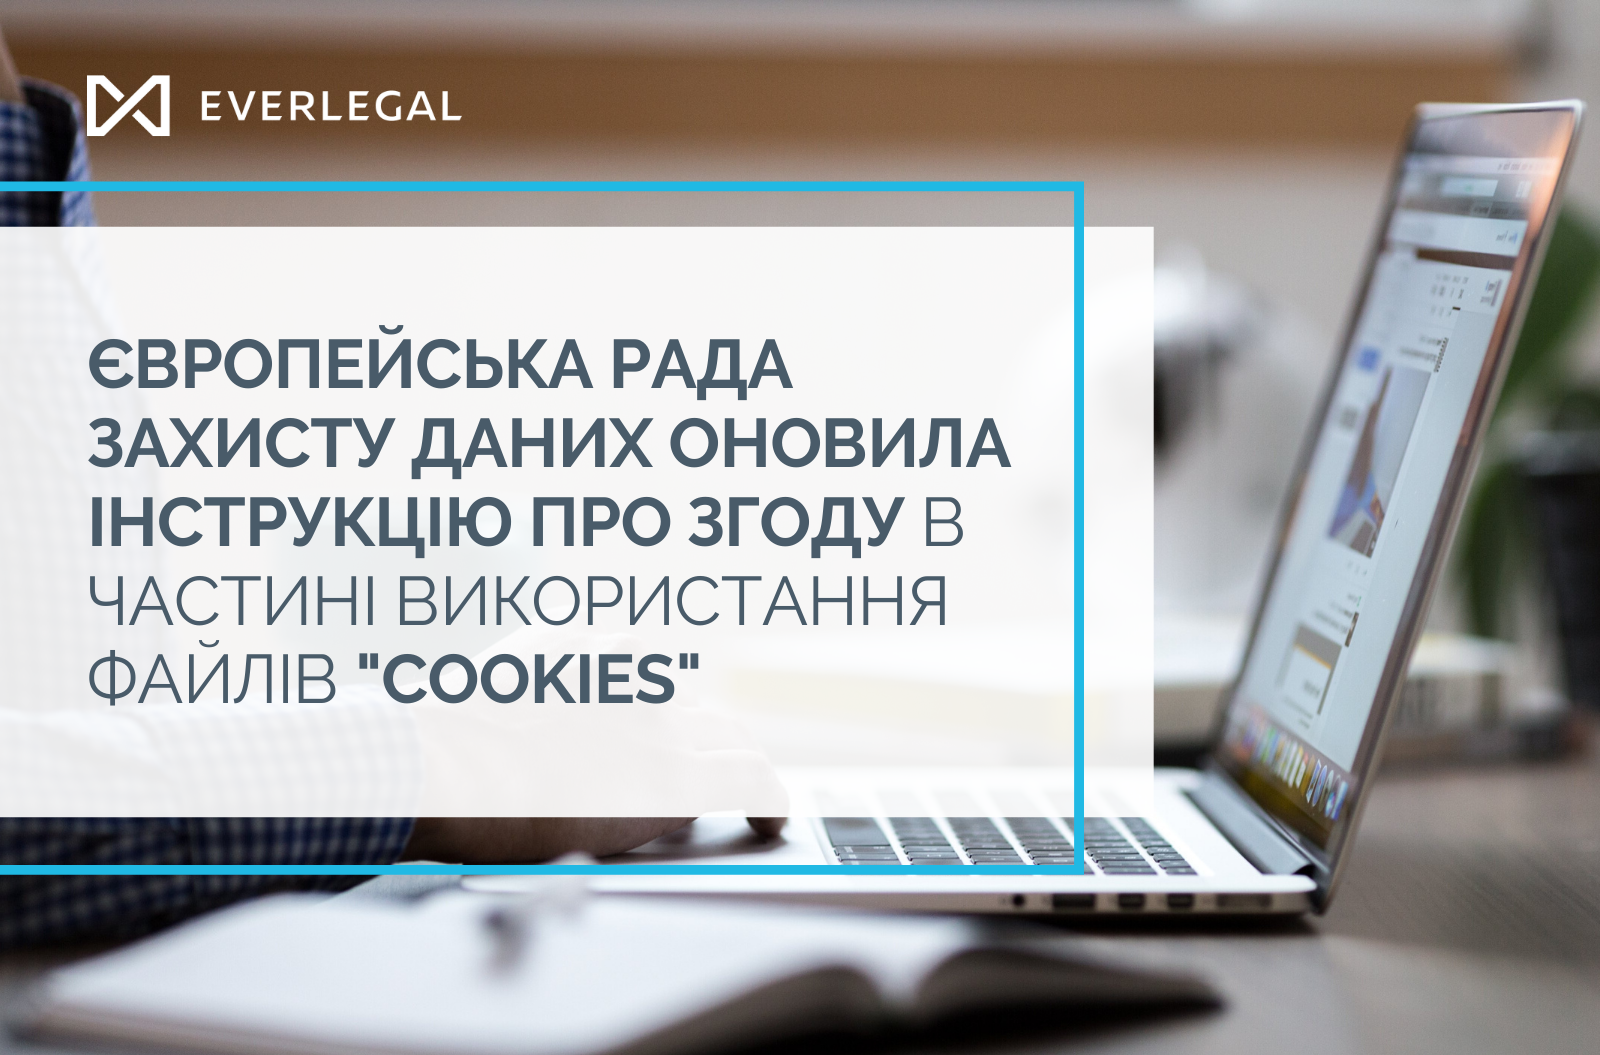 The European Data Protection Board has updated the Guidelines on consent in the part of the cookies use